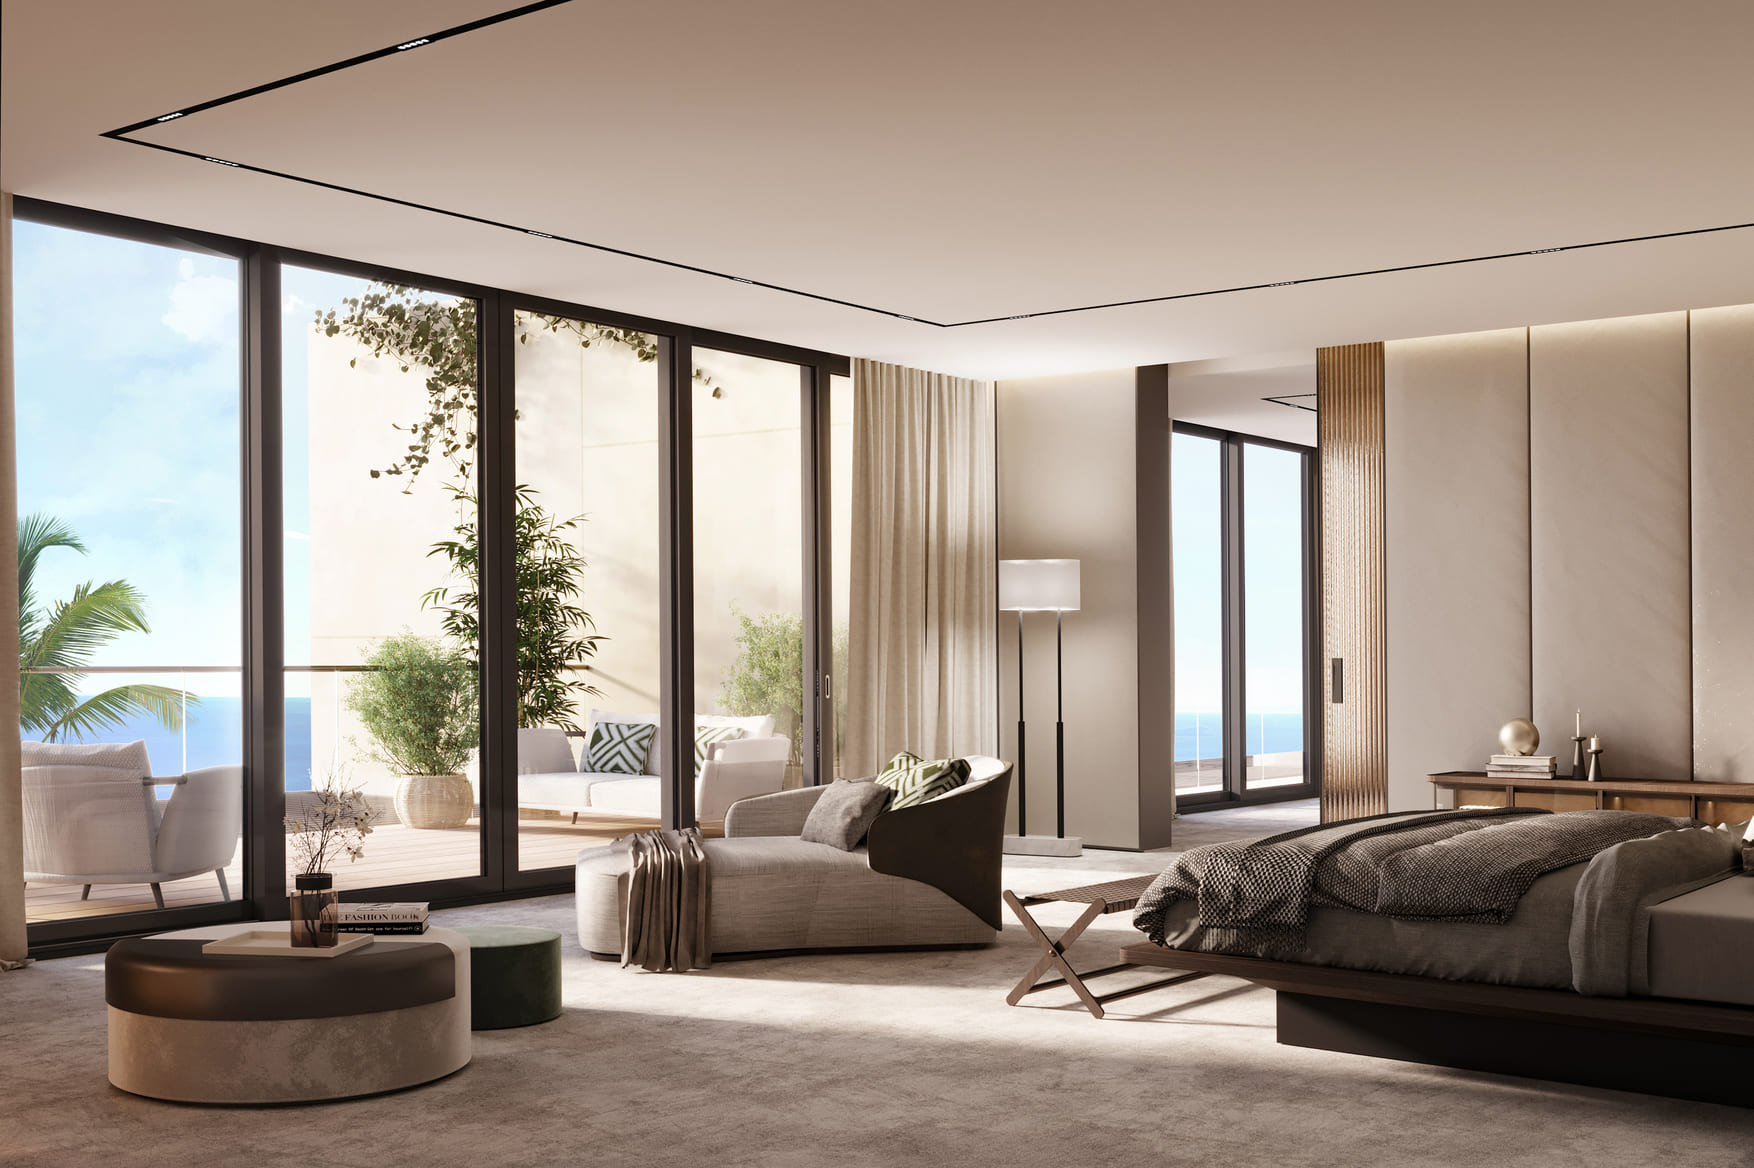 A luxurious bedroom with floor-to-ceiling windows offering a sea view, a large bed, and a sitting area with a round ottoman, in a neutral color scheme.